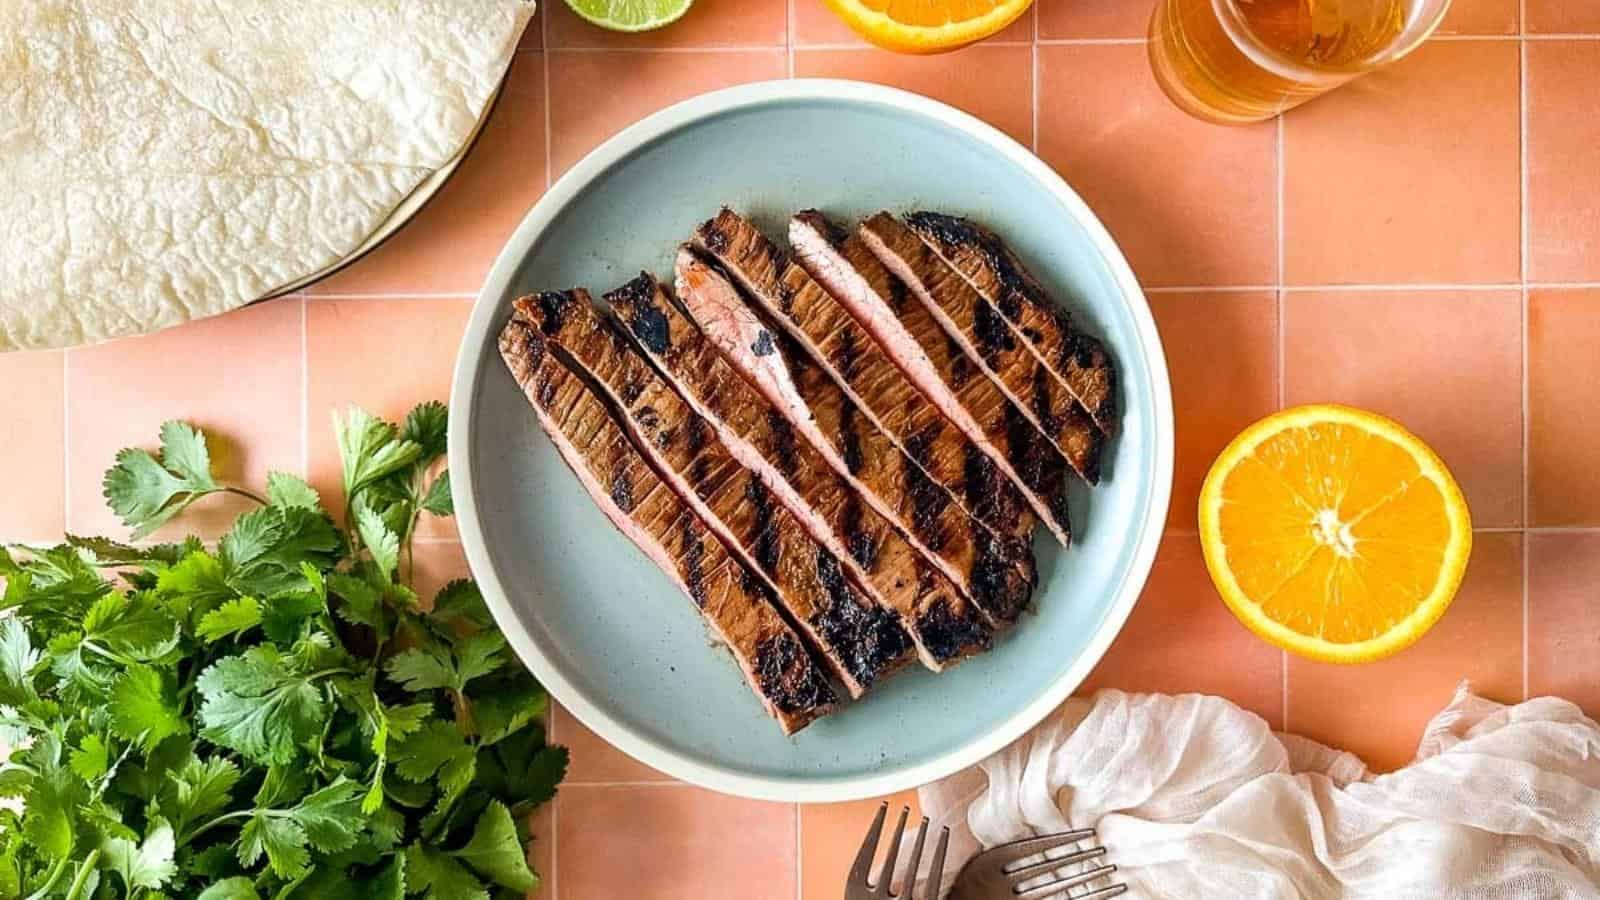 Carne asada on a blue plate surrounded by cilantro, halved oranges, limes, and beer.